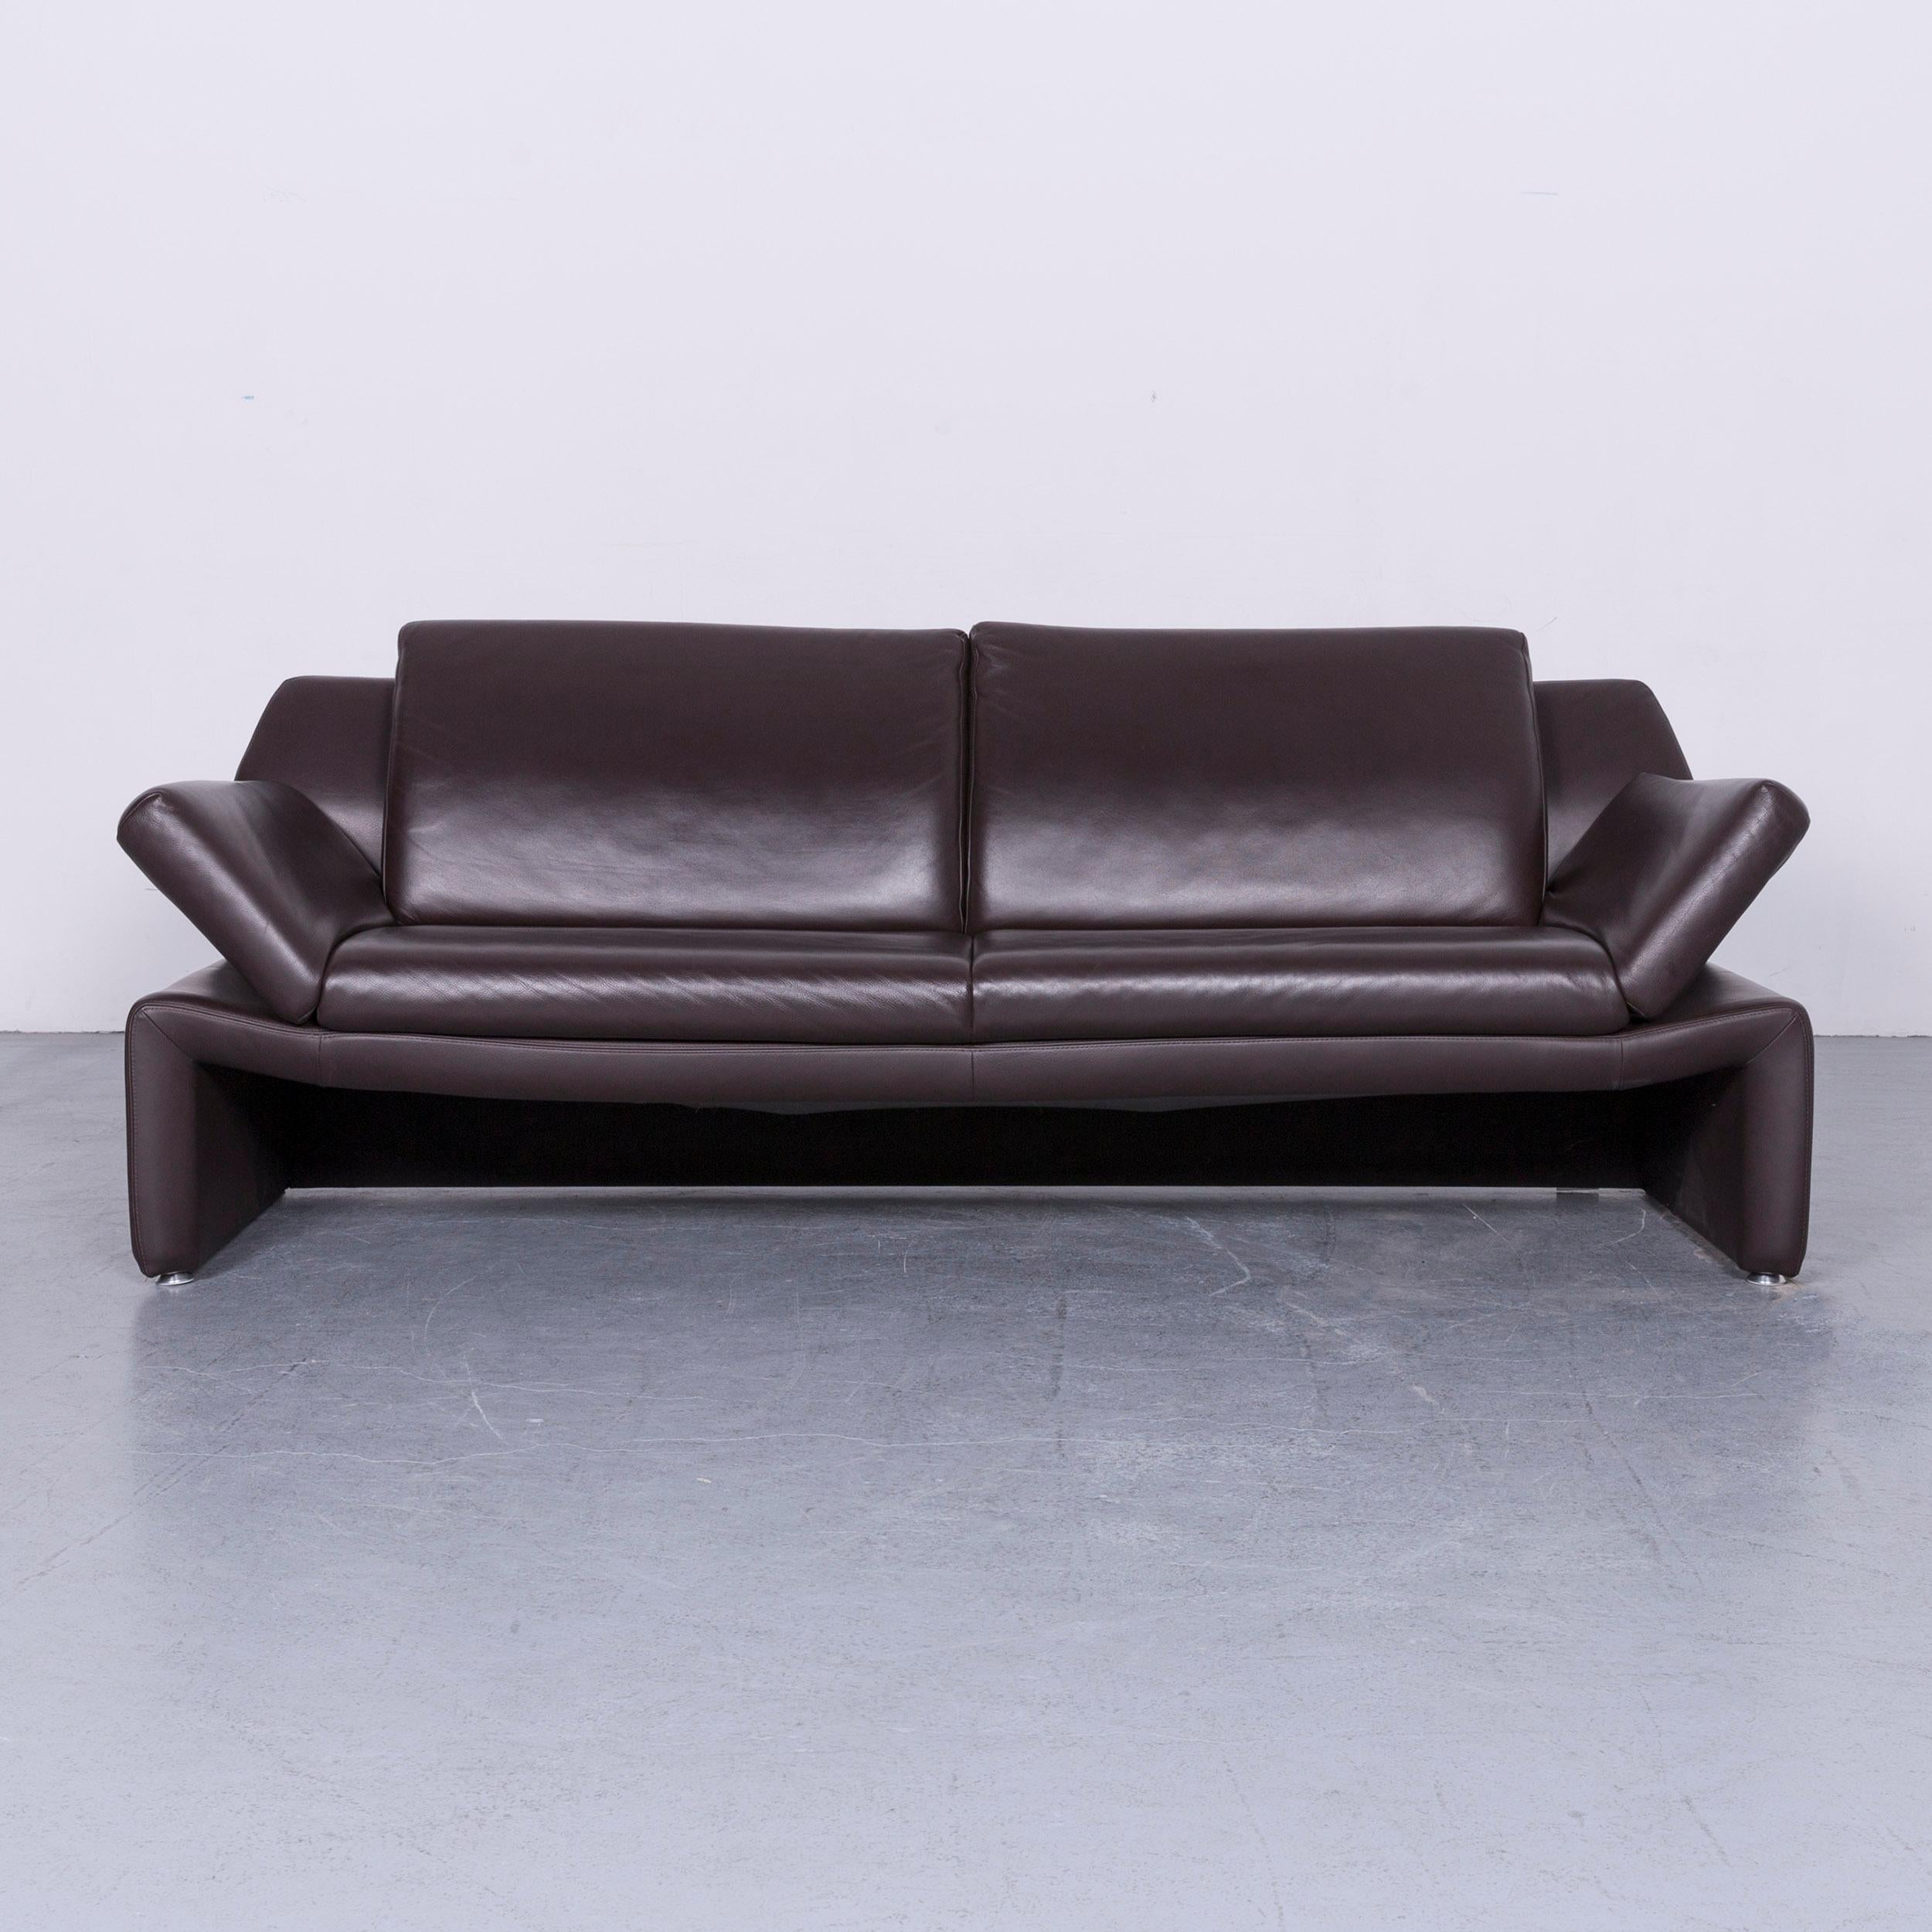 We bring to you a Laauser designer leather sofa brown three-seat couch.